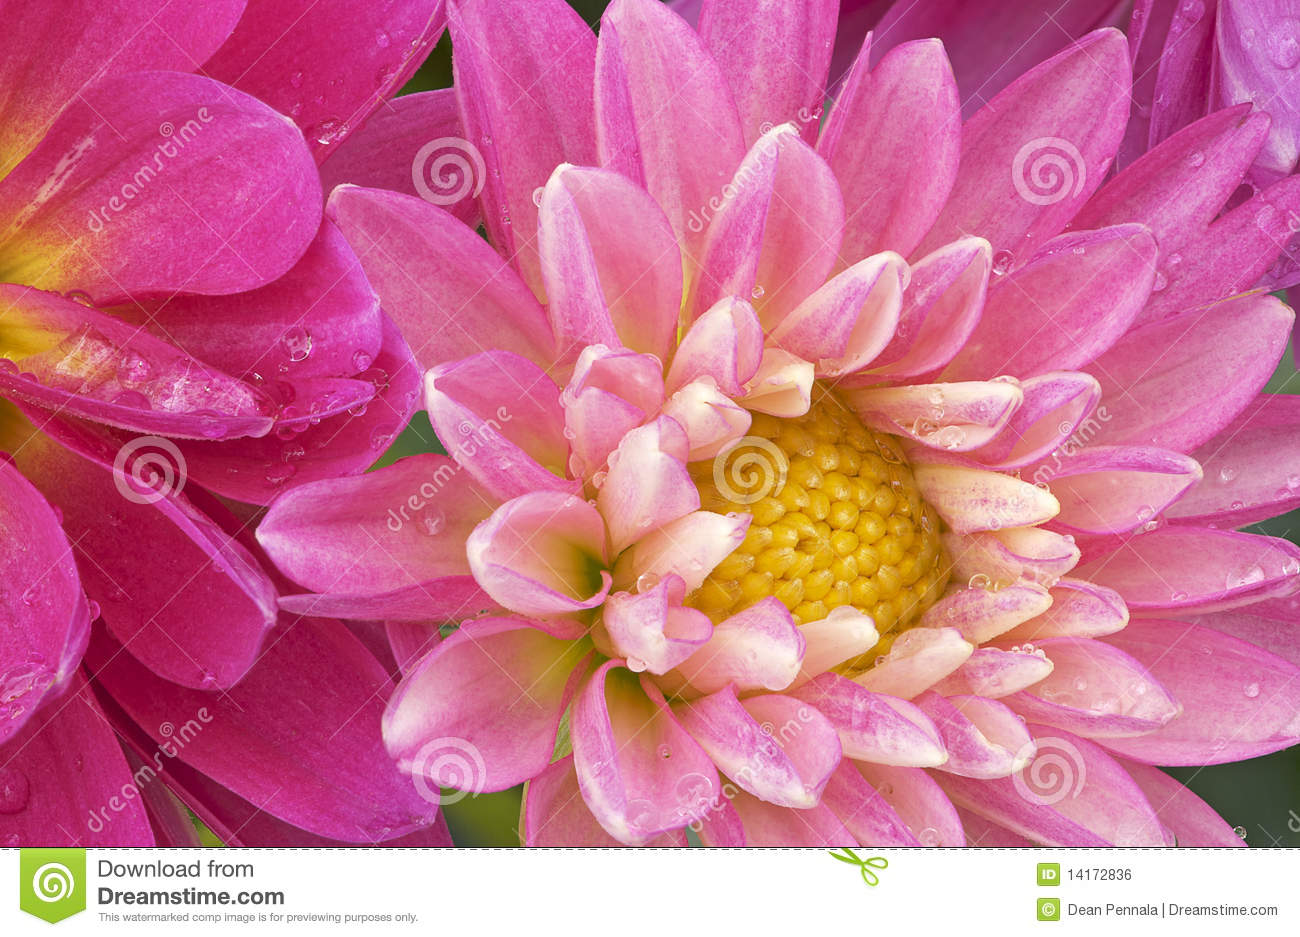 Pink Dahlias With Raindrops Royalty Free Stock Image   Image  14172836